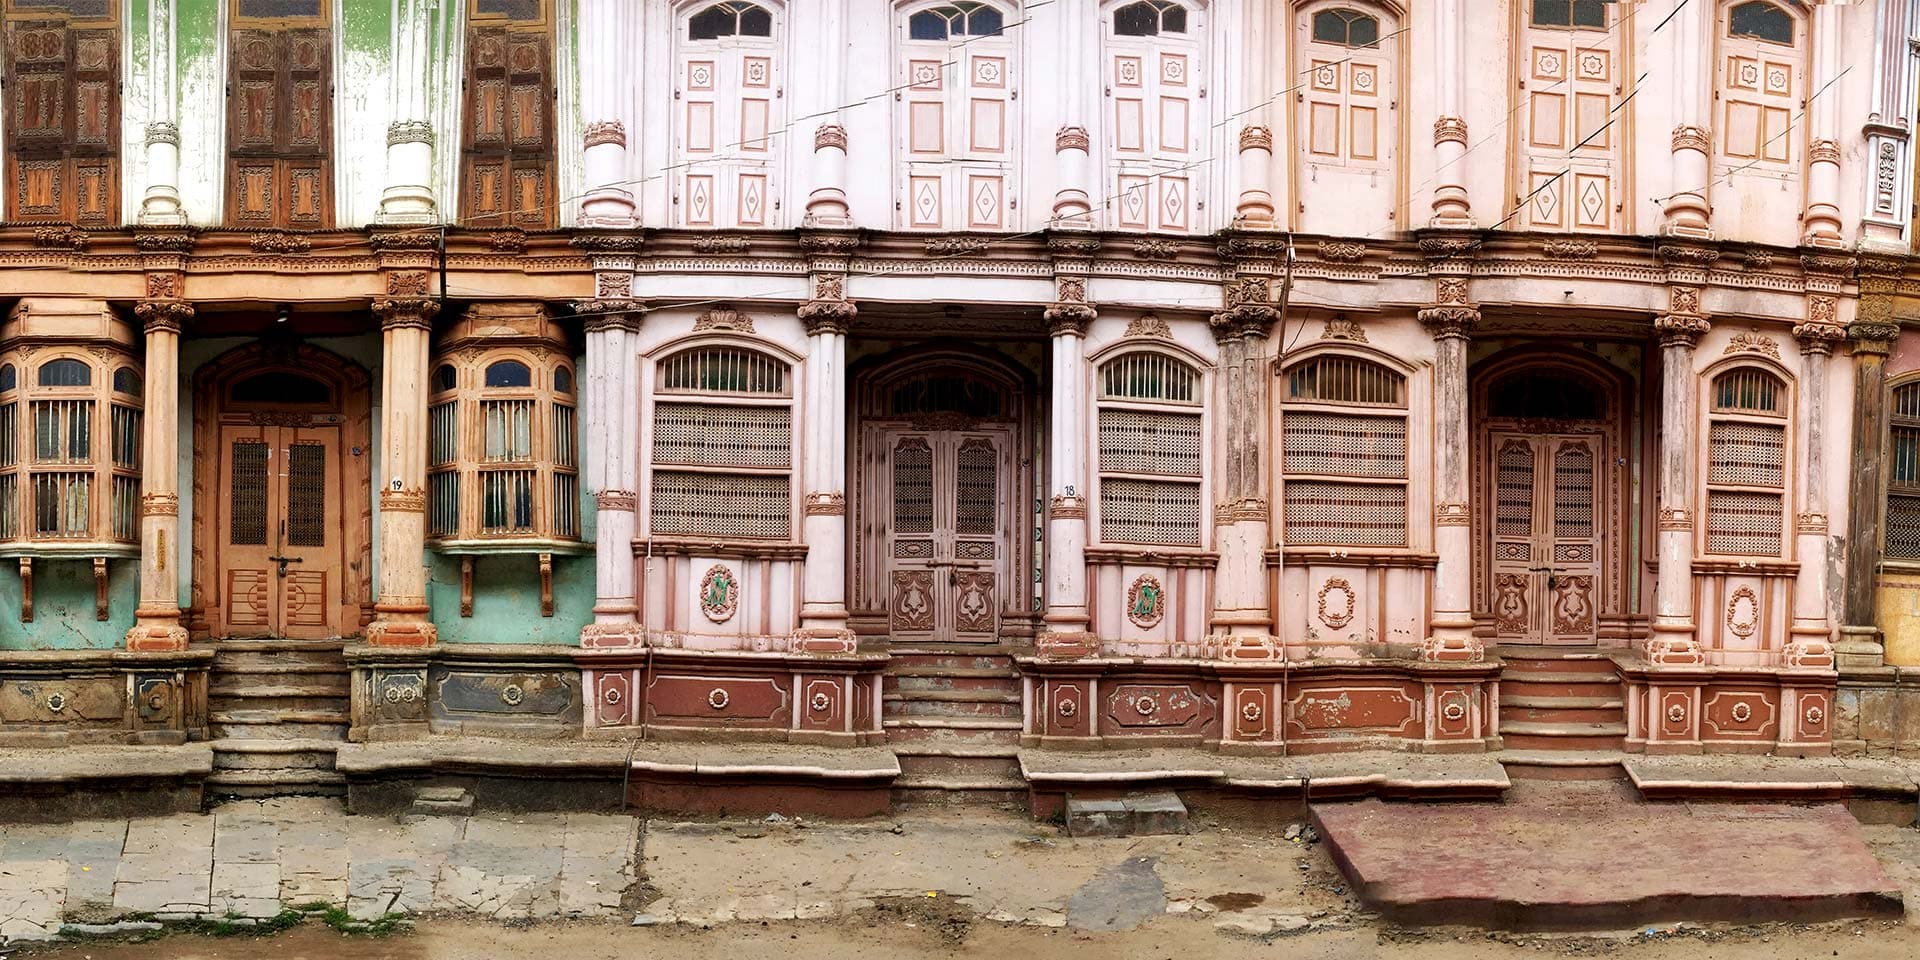 The Forgotten Gujarat Town of Sidhpur - Travelogues from Remote Lands